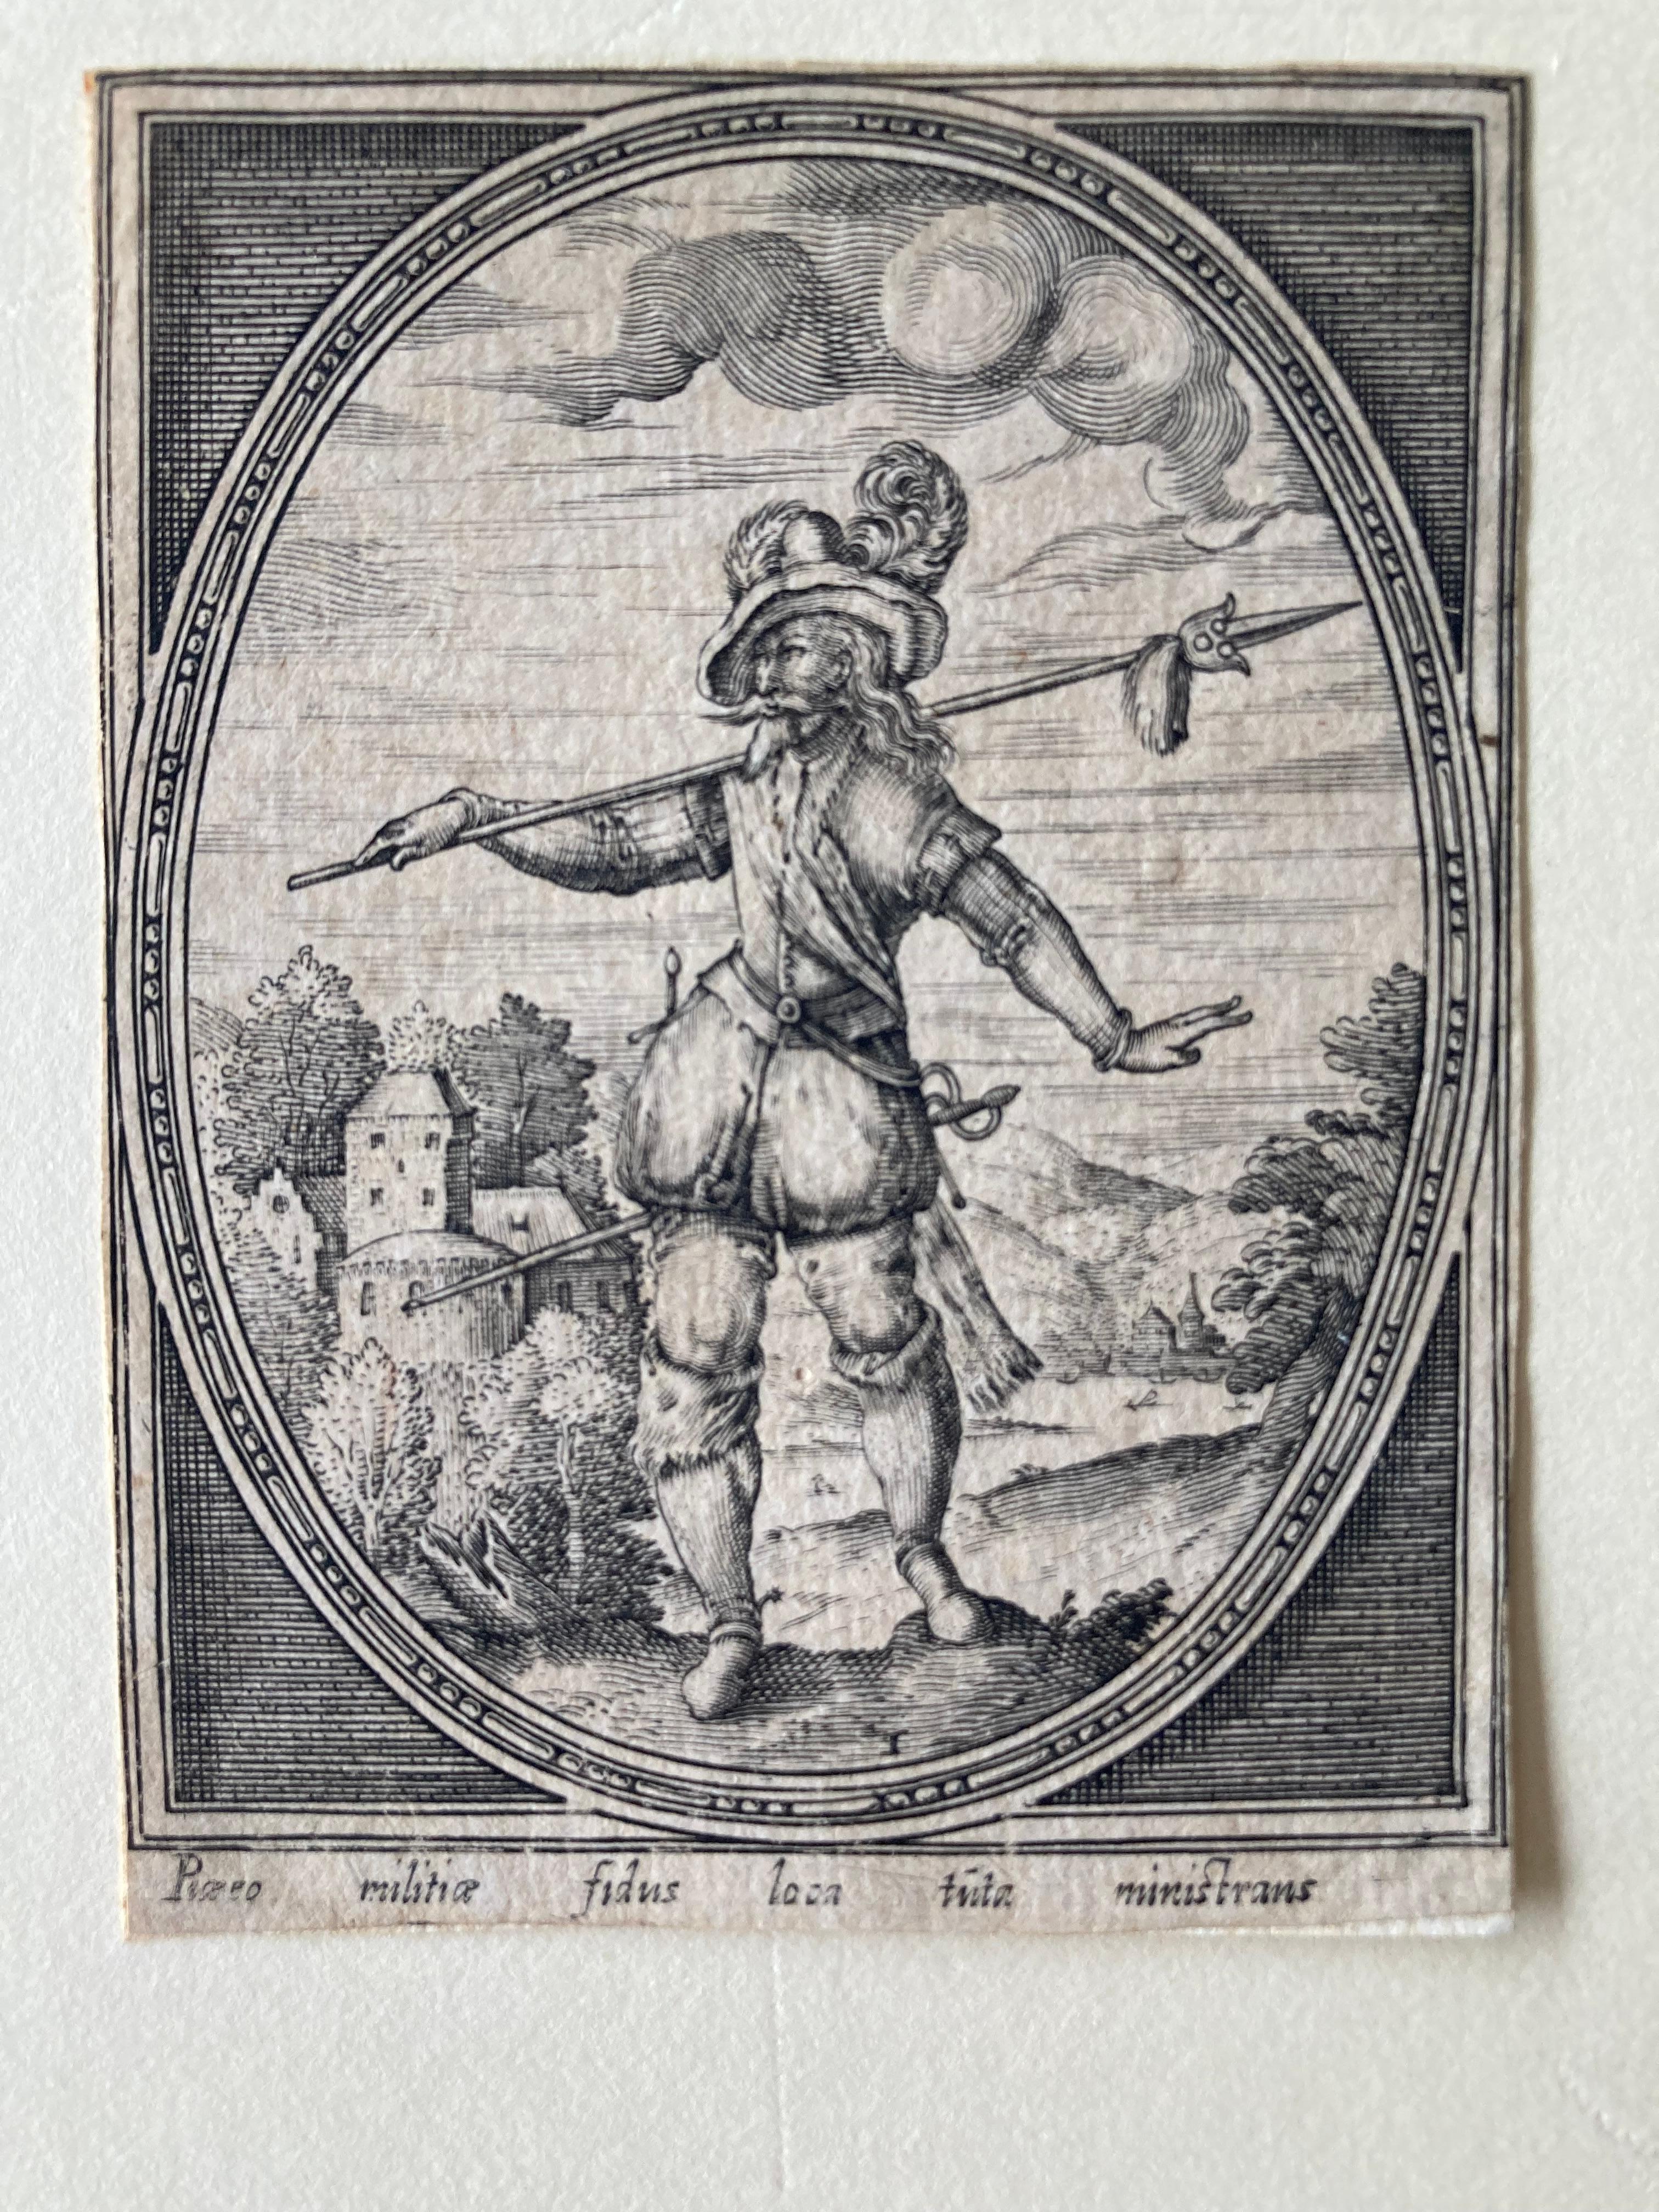 Heinrich Ulrich (aka Heinrich Ullrich) (fl.1567–1621)

“Soldier with Hellebarde”, 1598, out of the series, “The Guard of Emperor Rudolph” (aka “Old German Soldiers”; “Suite of Warriors”; “Retinue of Warriors